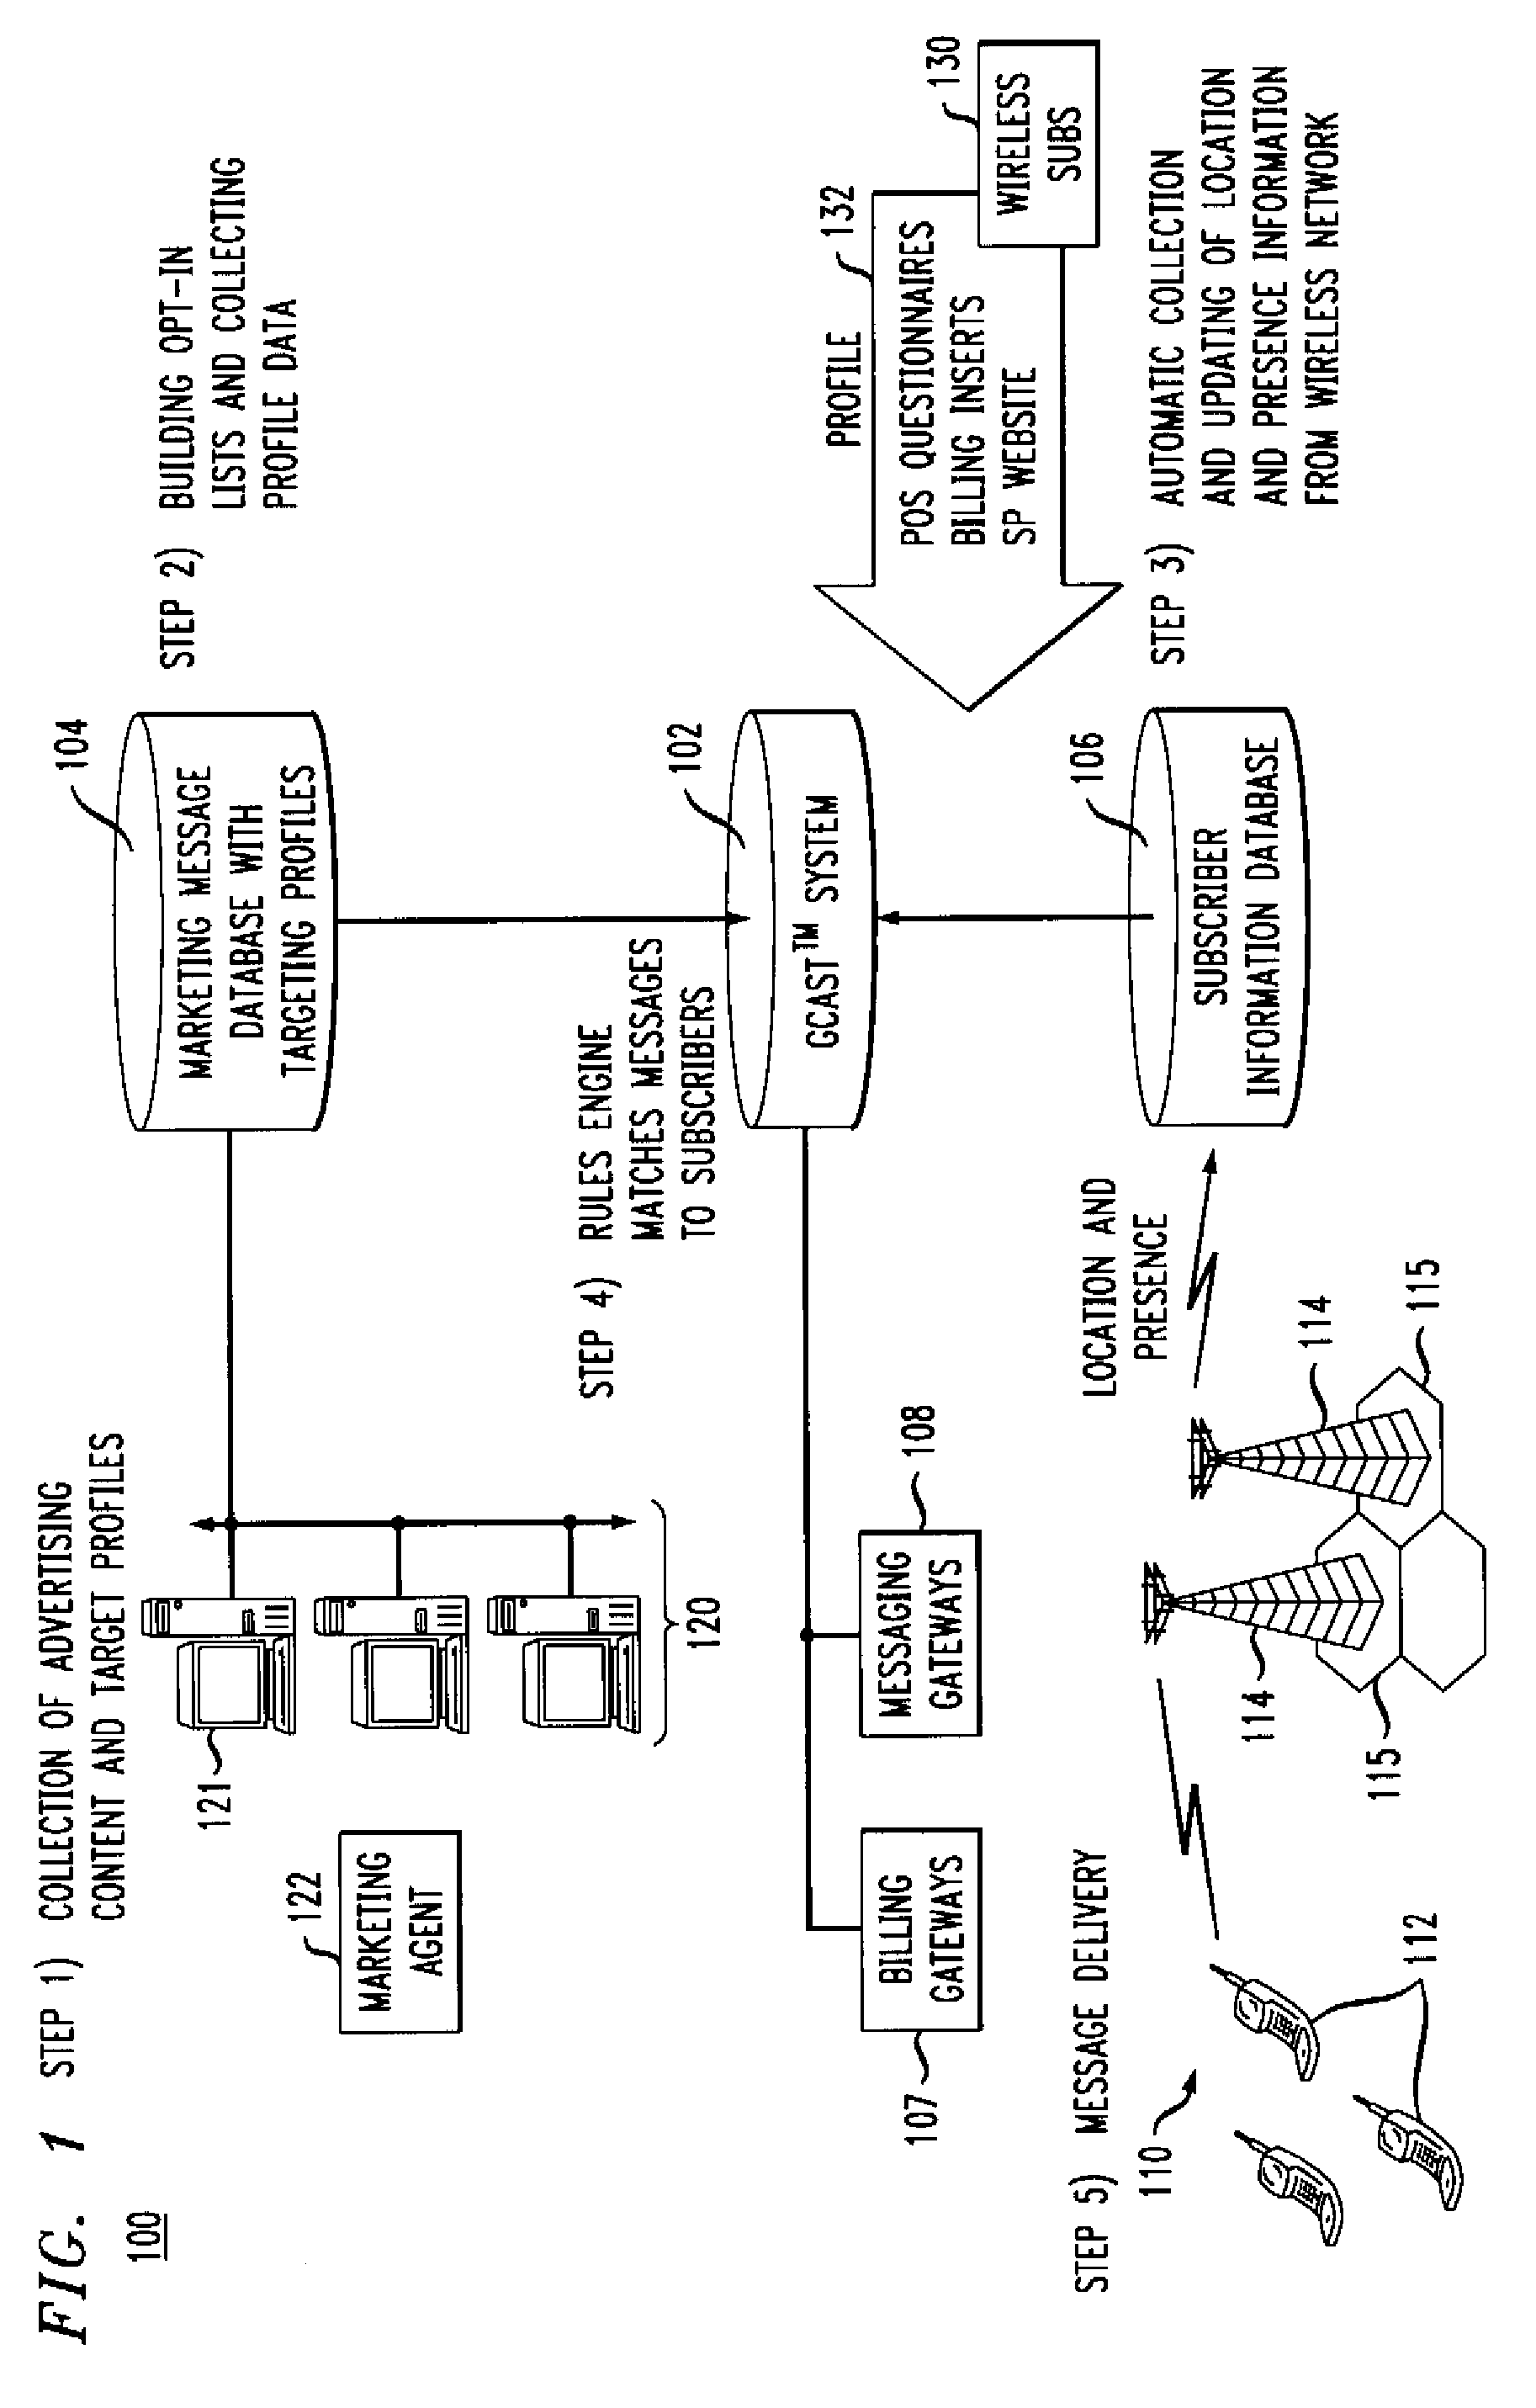 Methods and apparatus for providing location-based services in a wireless communication system